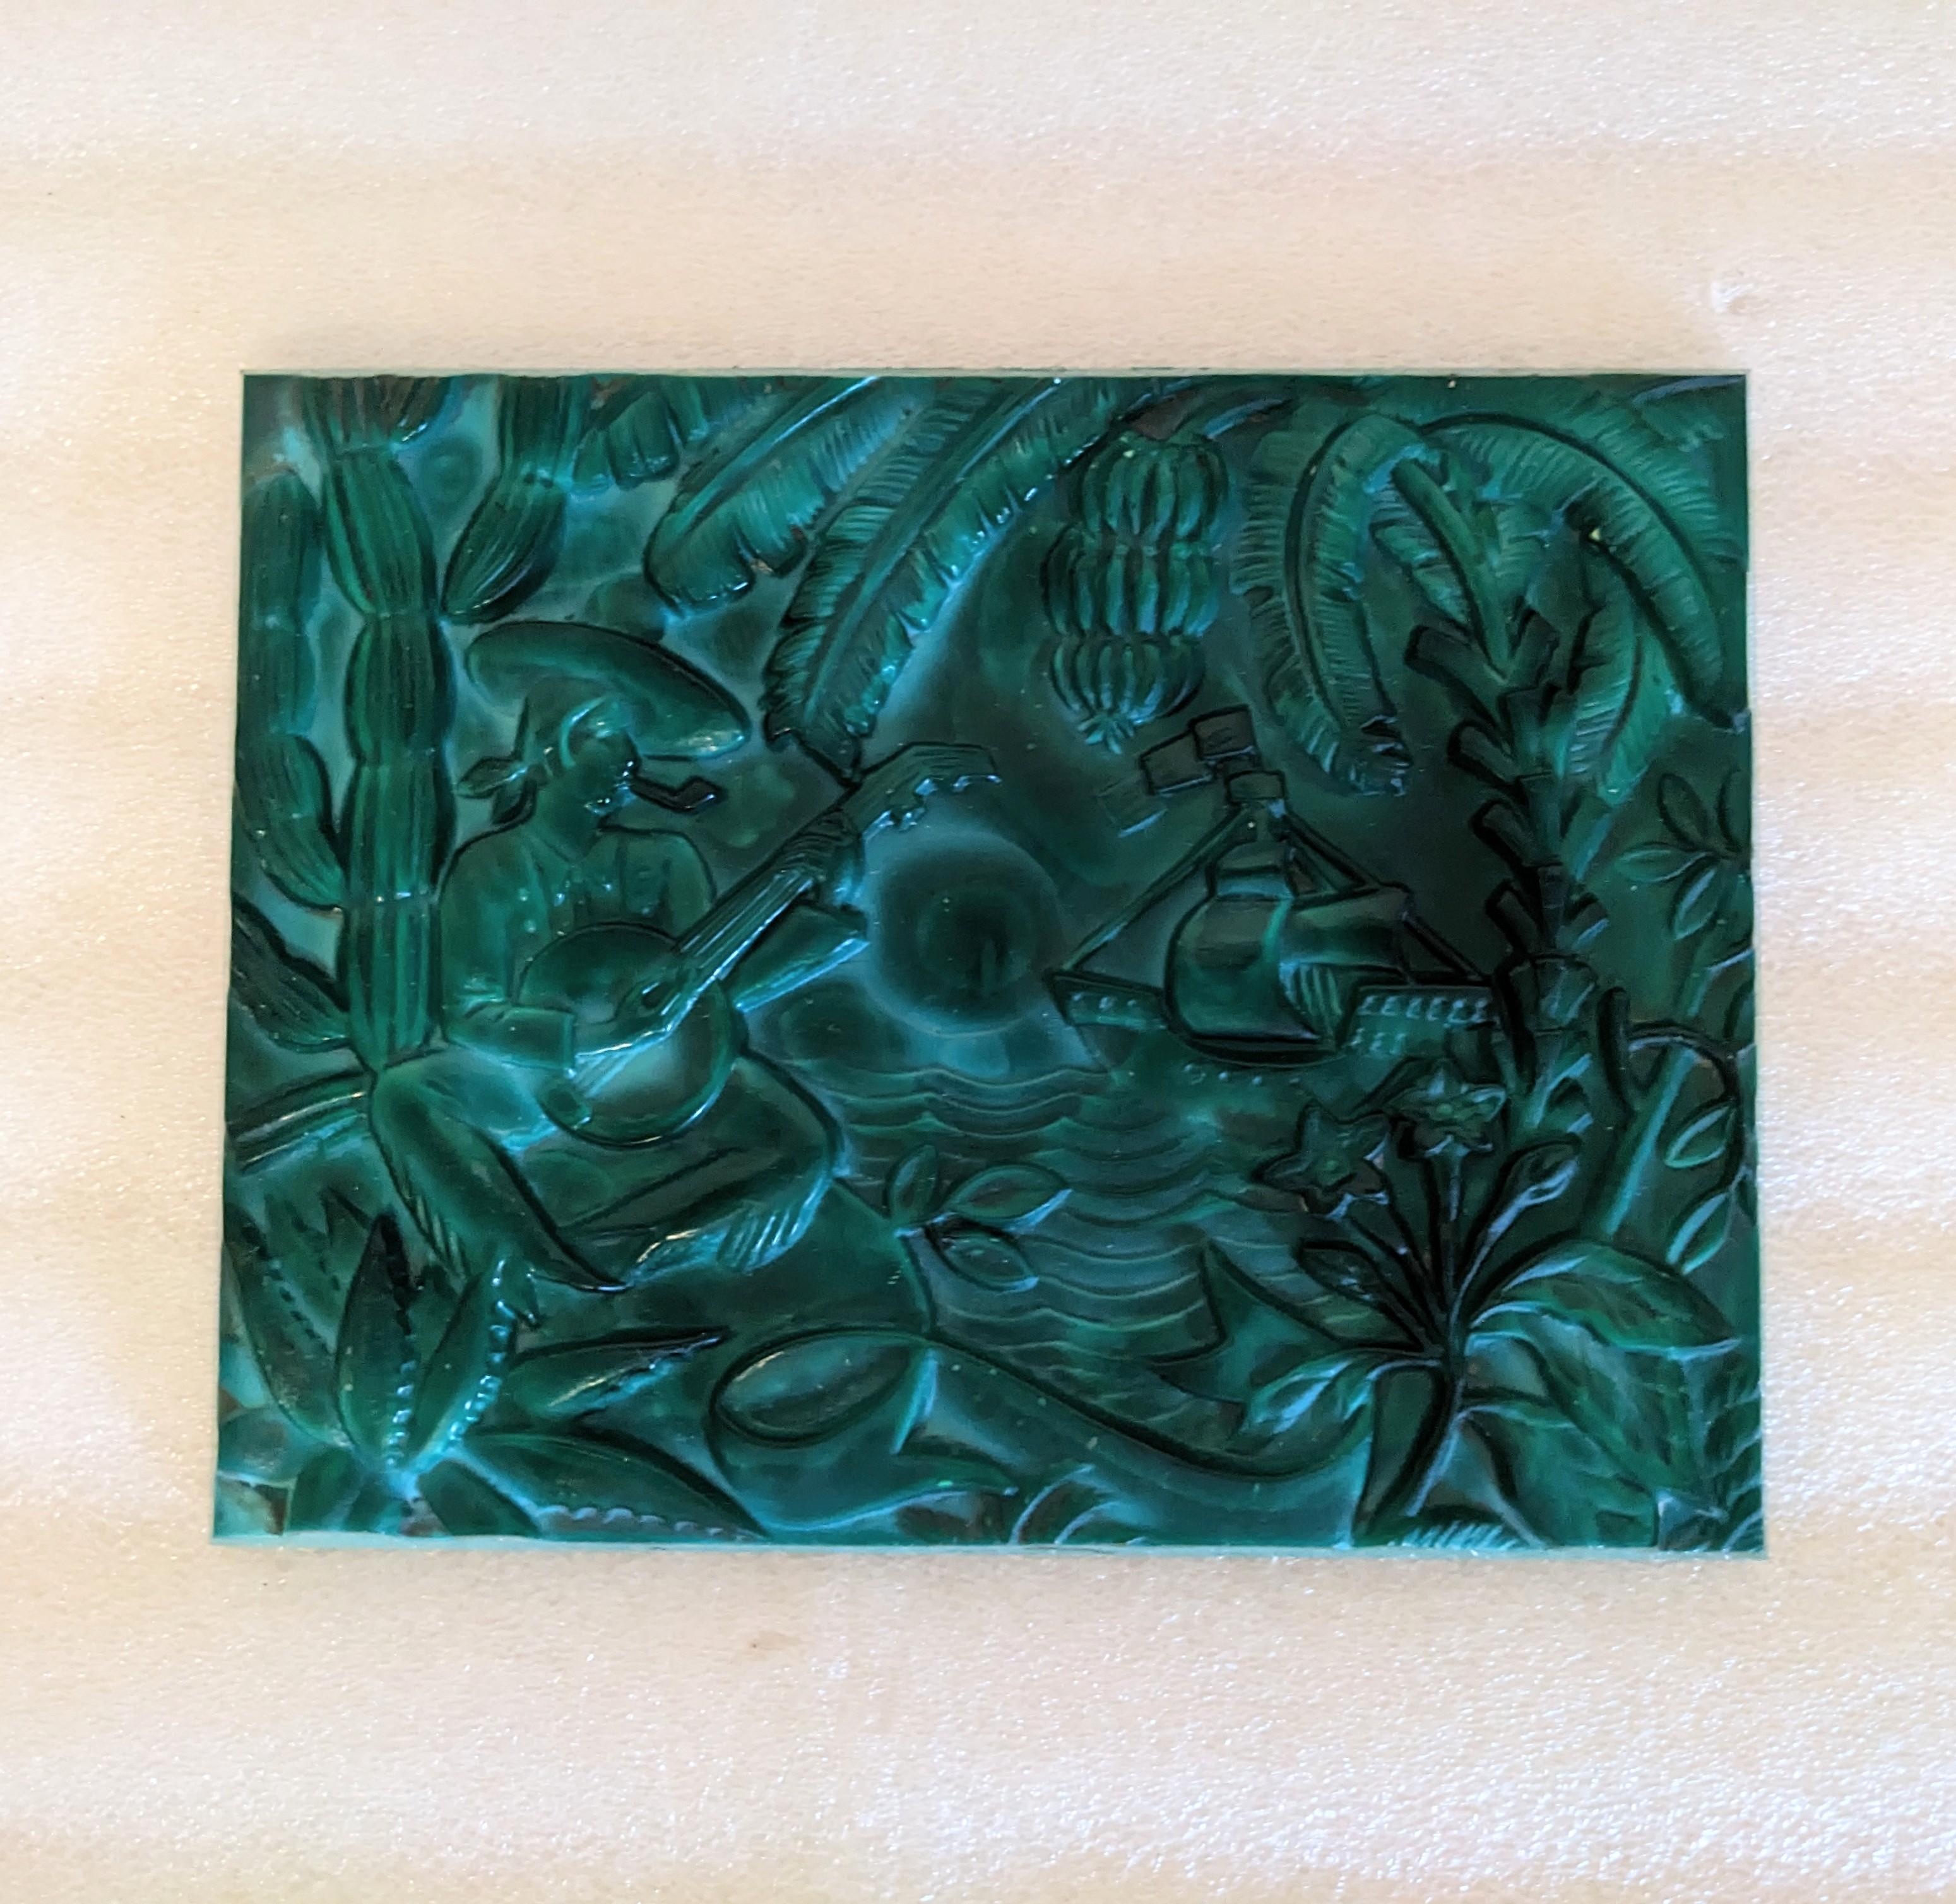 Art Deco Czech Malachite Glass Molded Panel from the 1930's. Depicting a musician playing in a tropical scene by the sea. 6.5